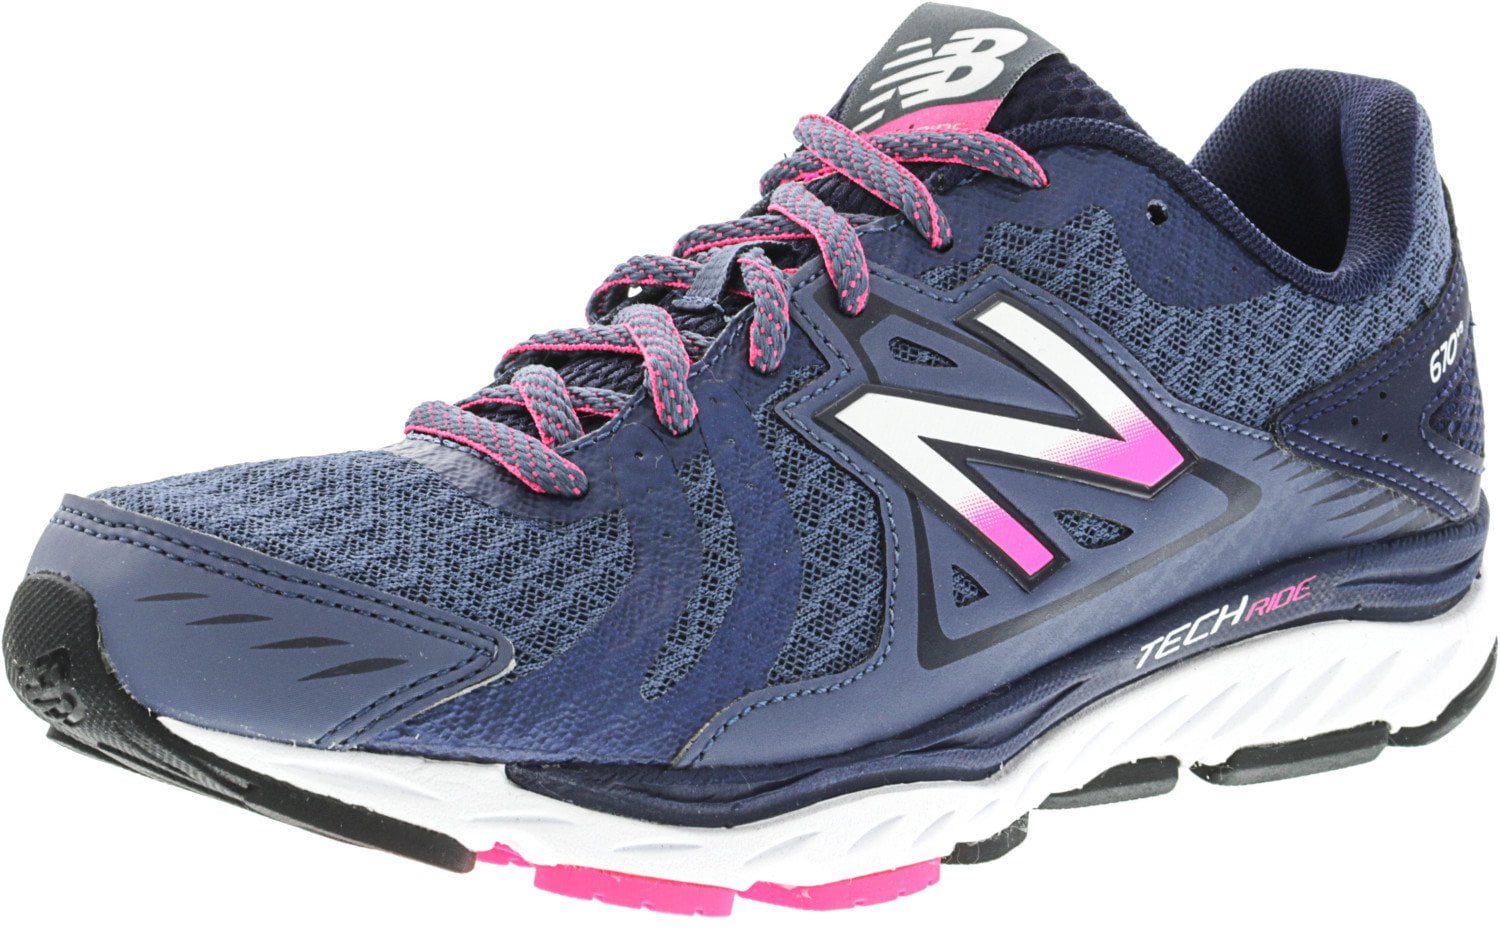 W670 Gp5 Ankle-High Running Shoe - 6.5W 